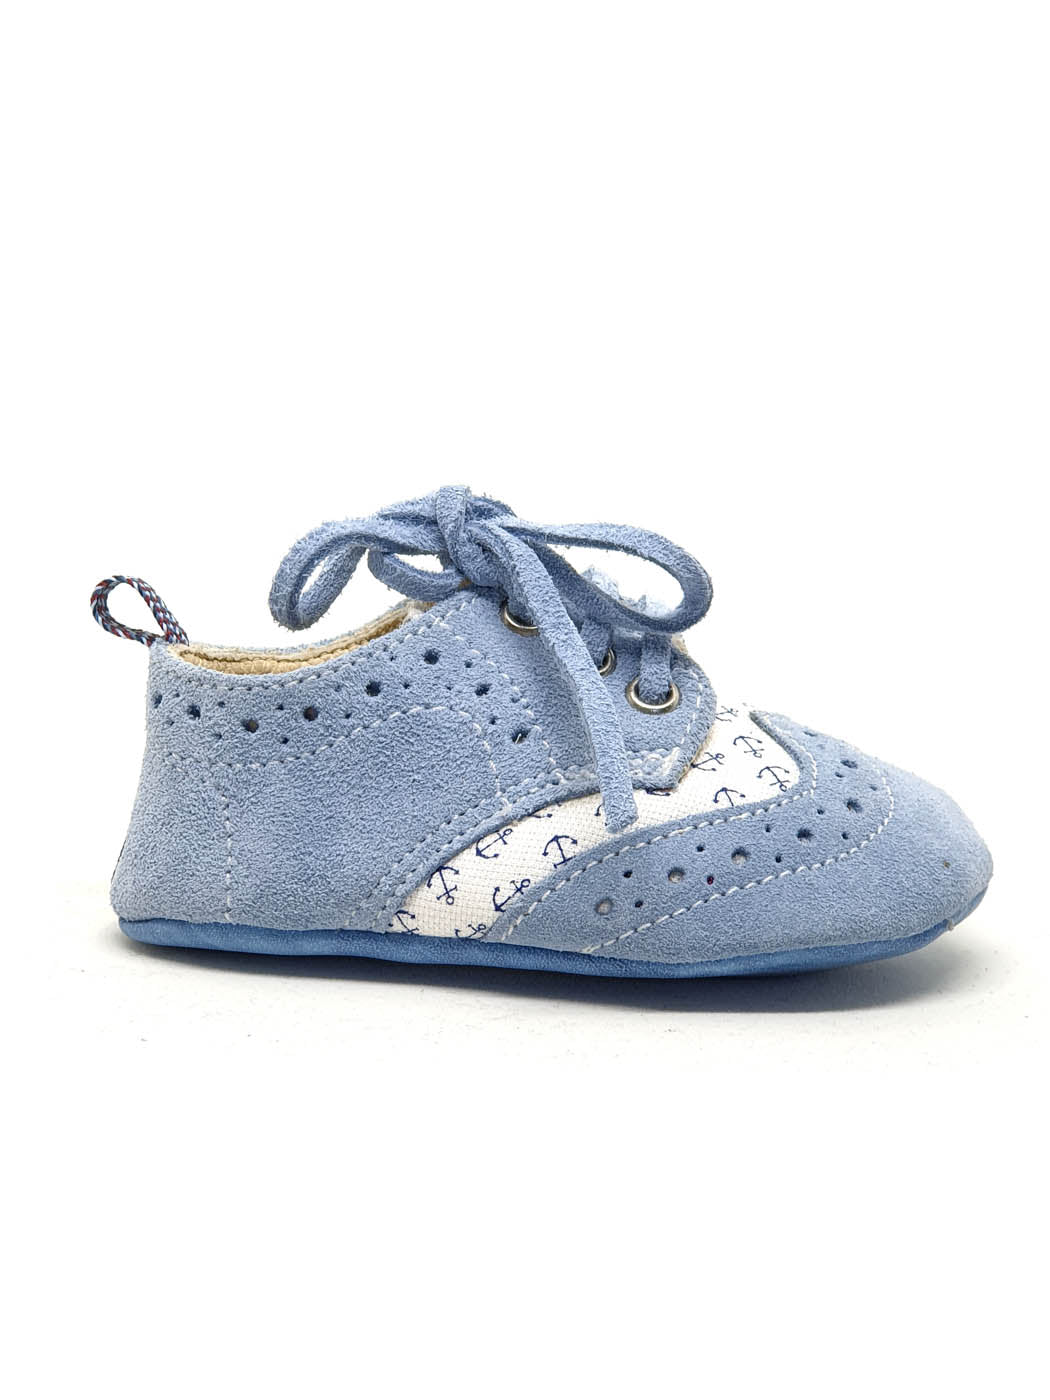 Baby's Suede Shoe for boy -Charlie Blue